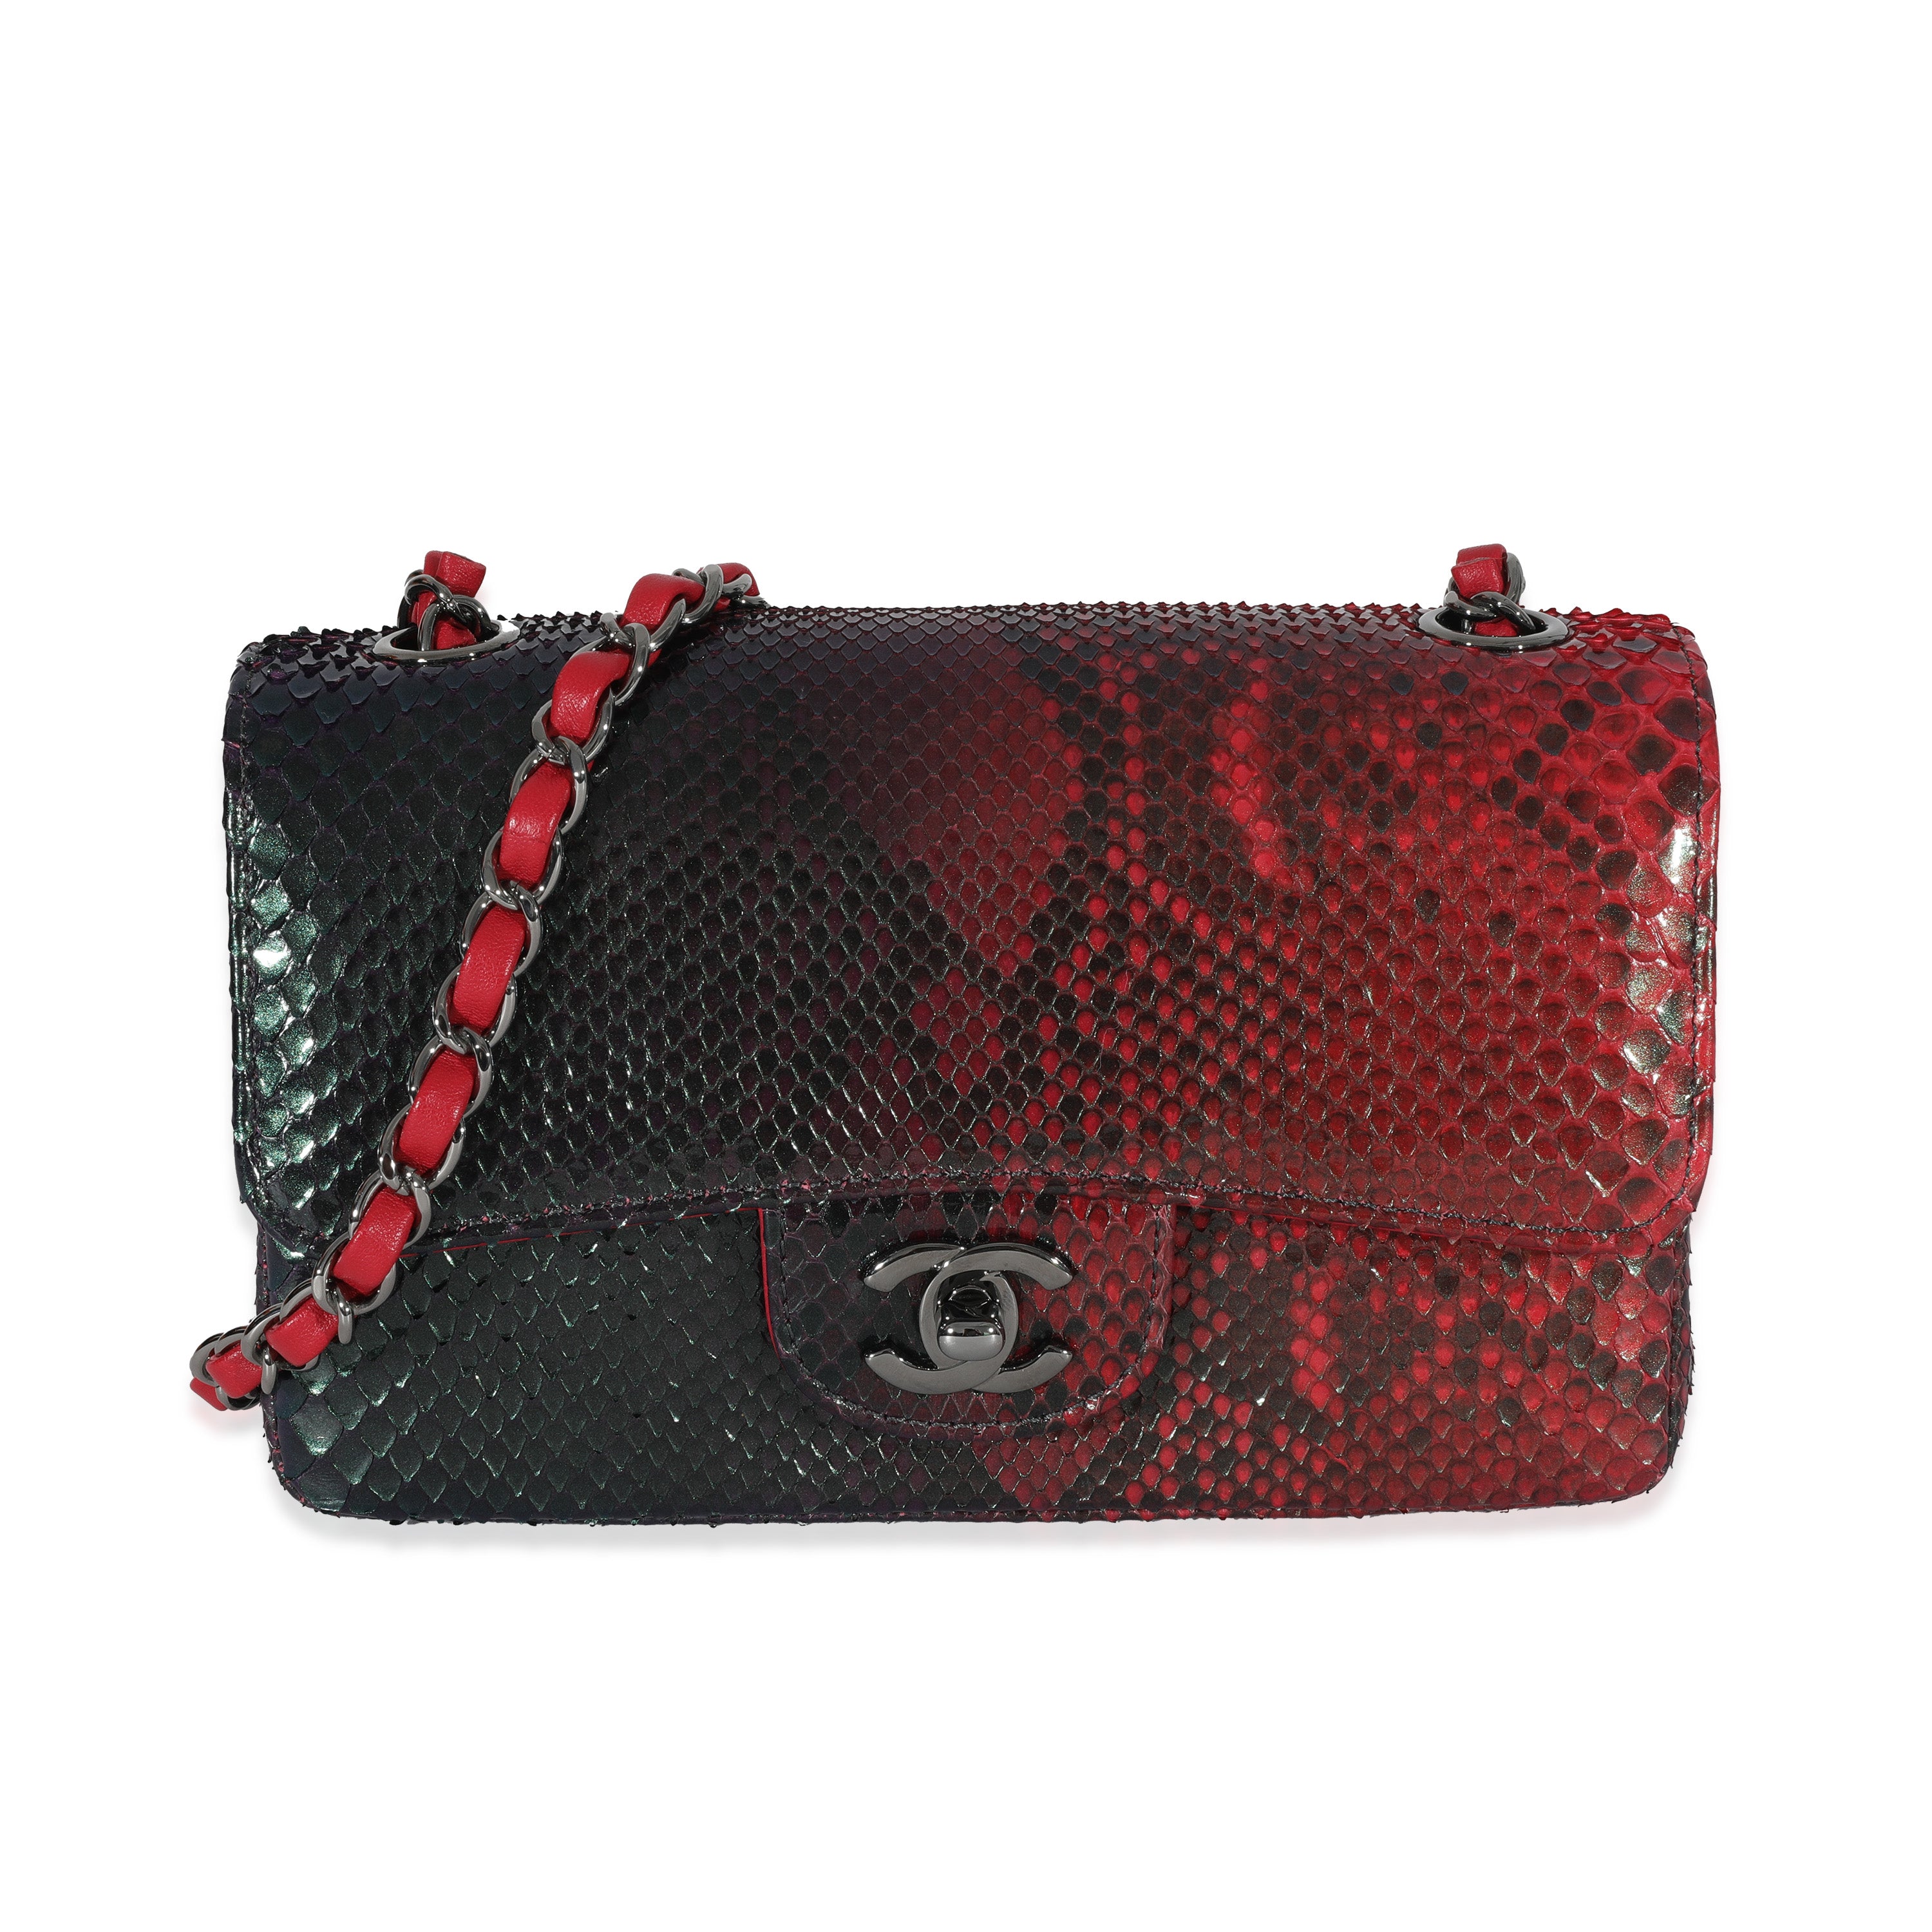 Chanel 18K Red Black Ombre Iridescent Python Mini Flap Bag RHW